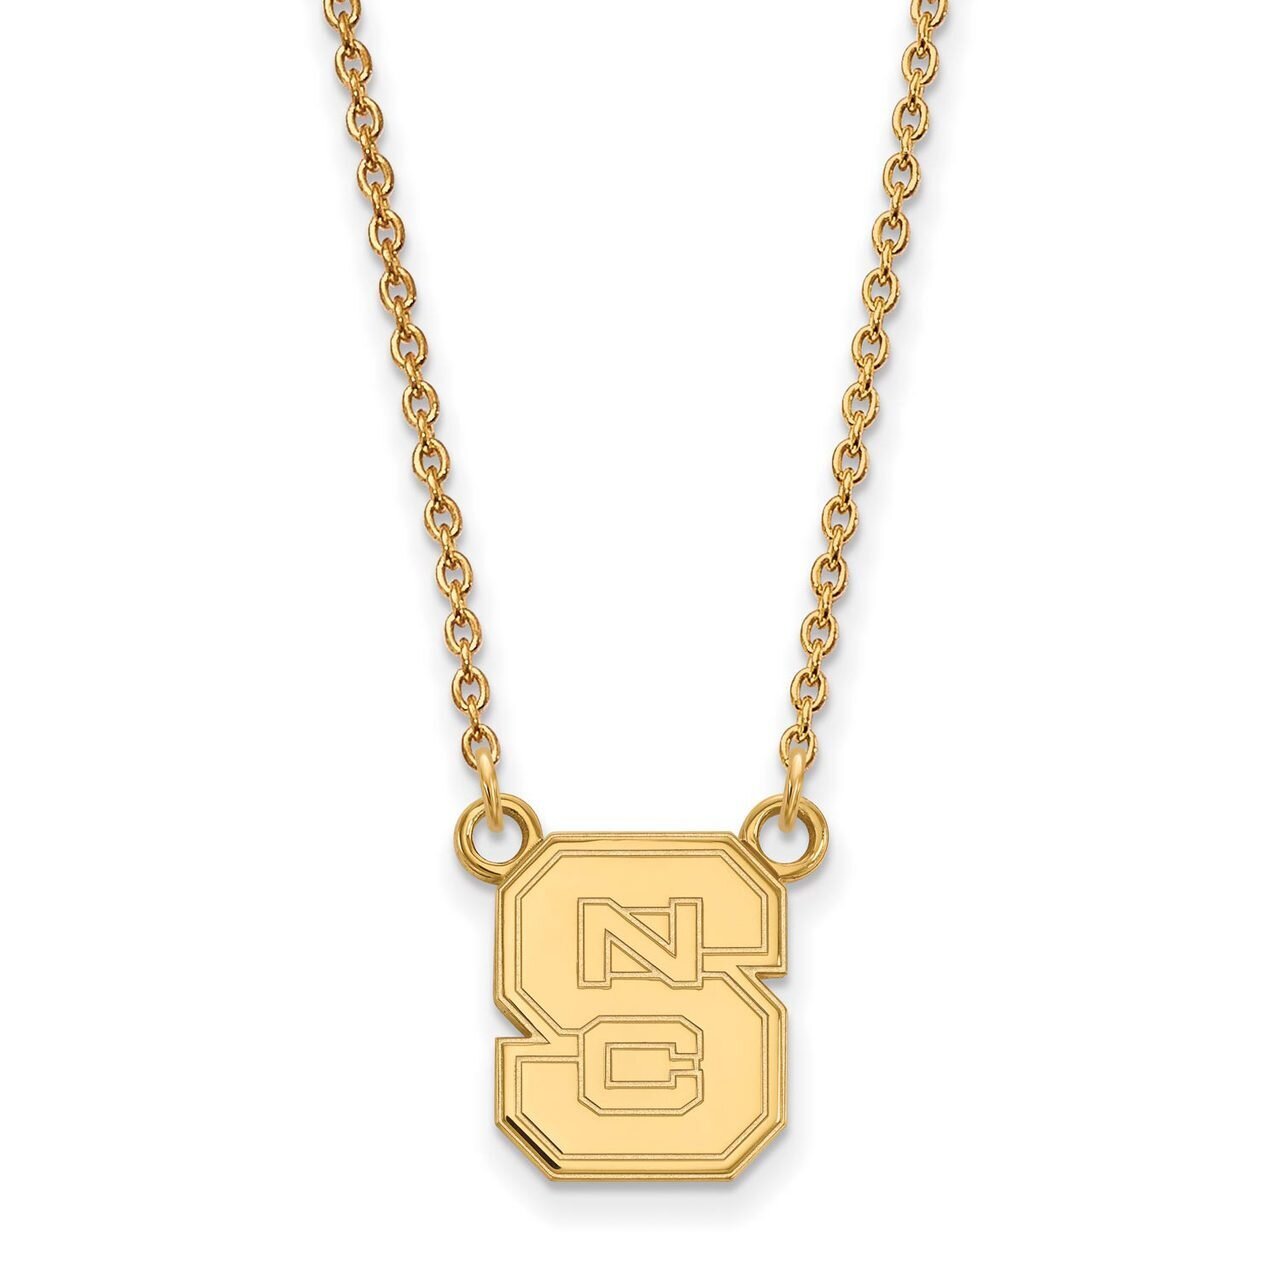 North Carolina State University Small Pendant with Chain Necklace 10k Yellow Gold 1Y015NCS-18